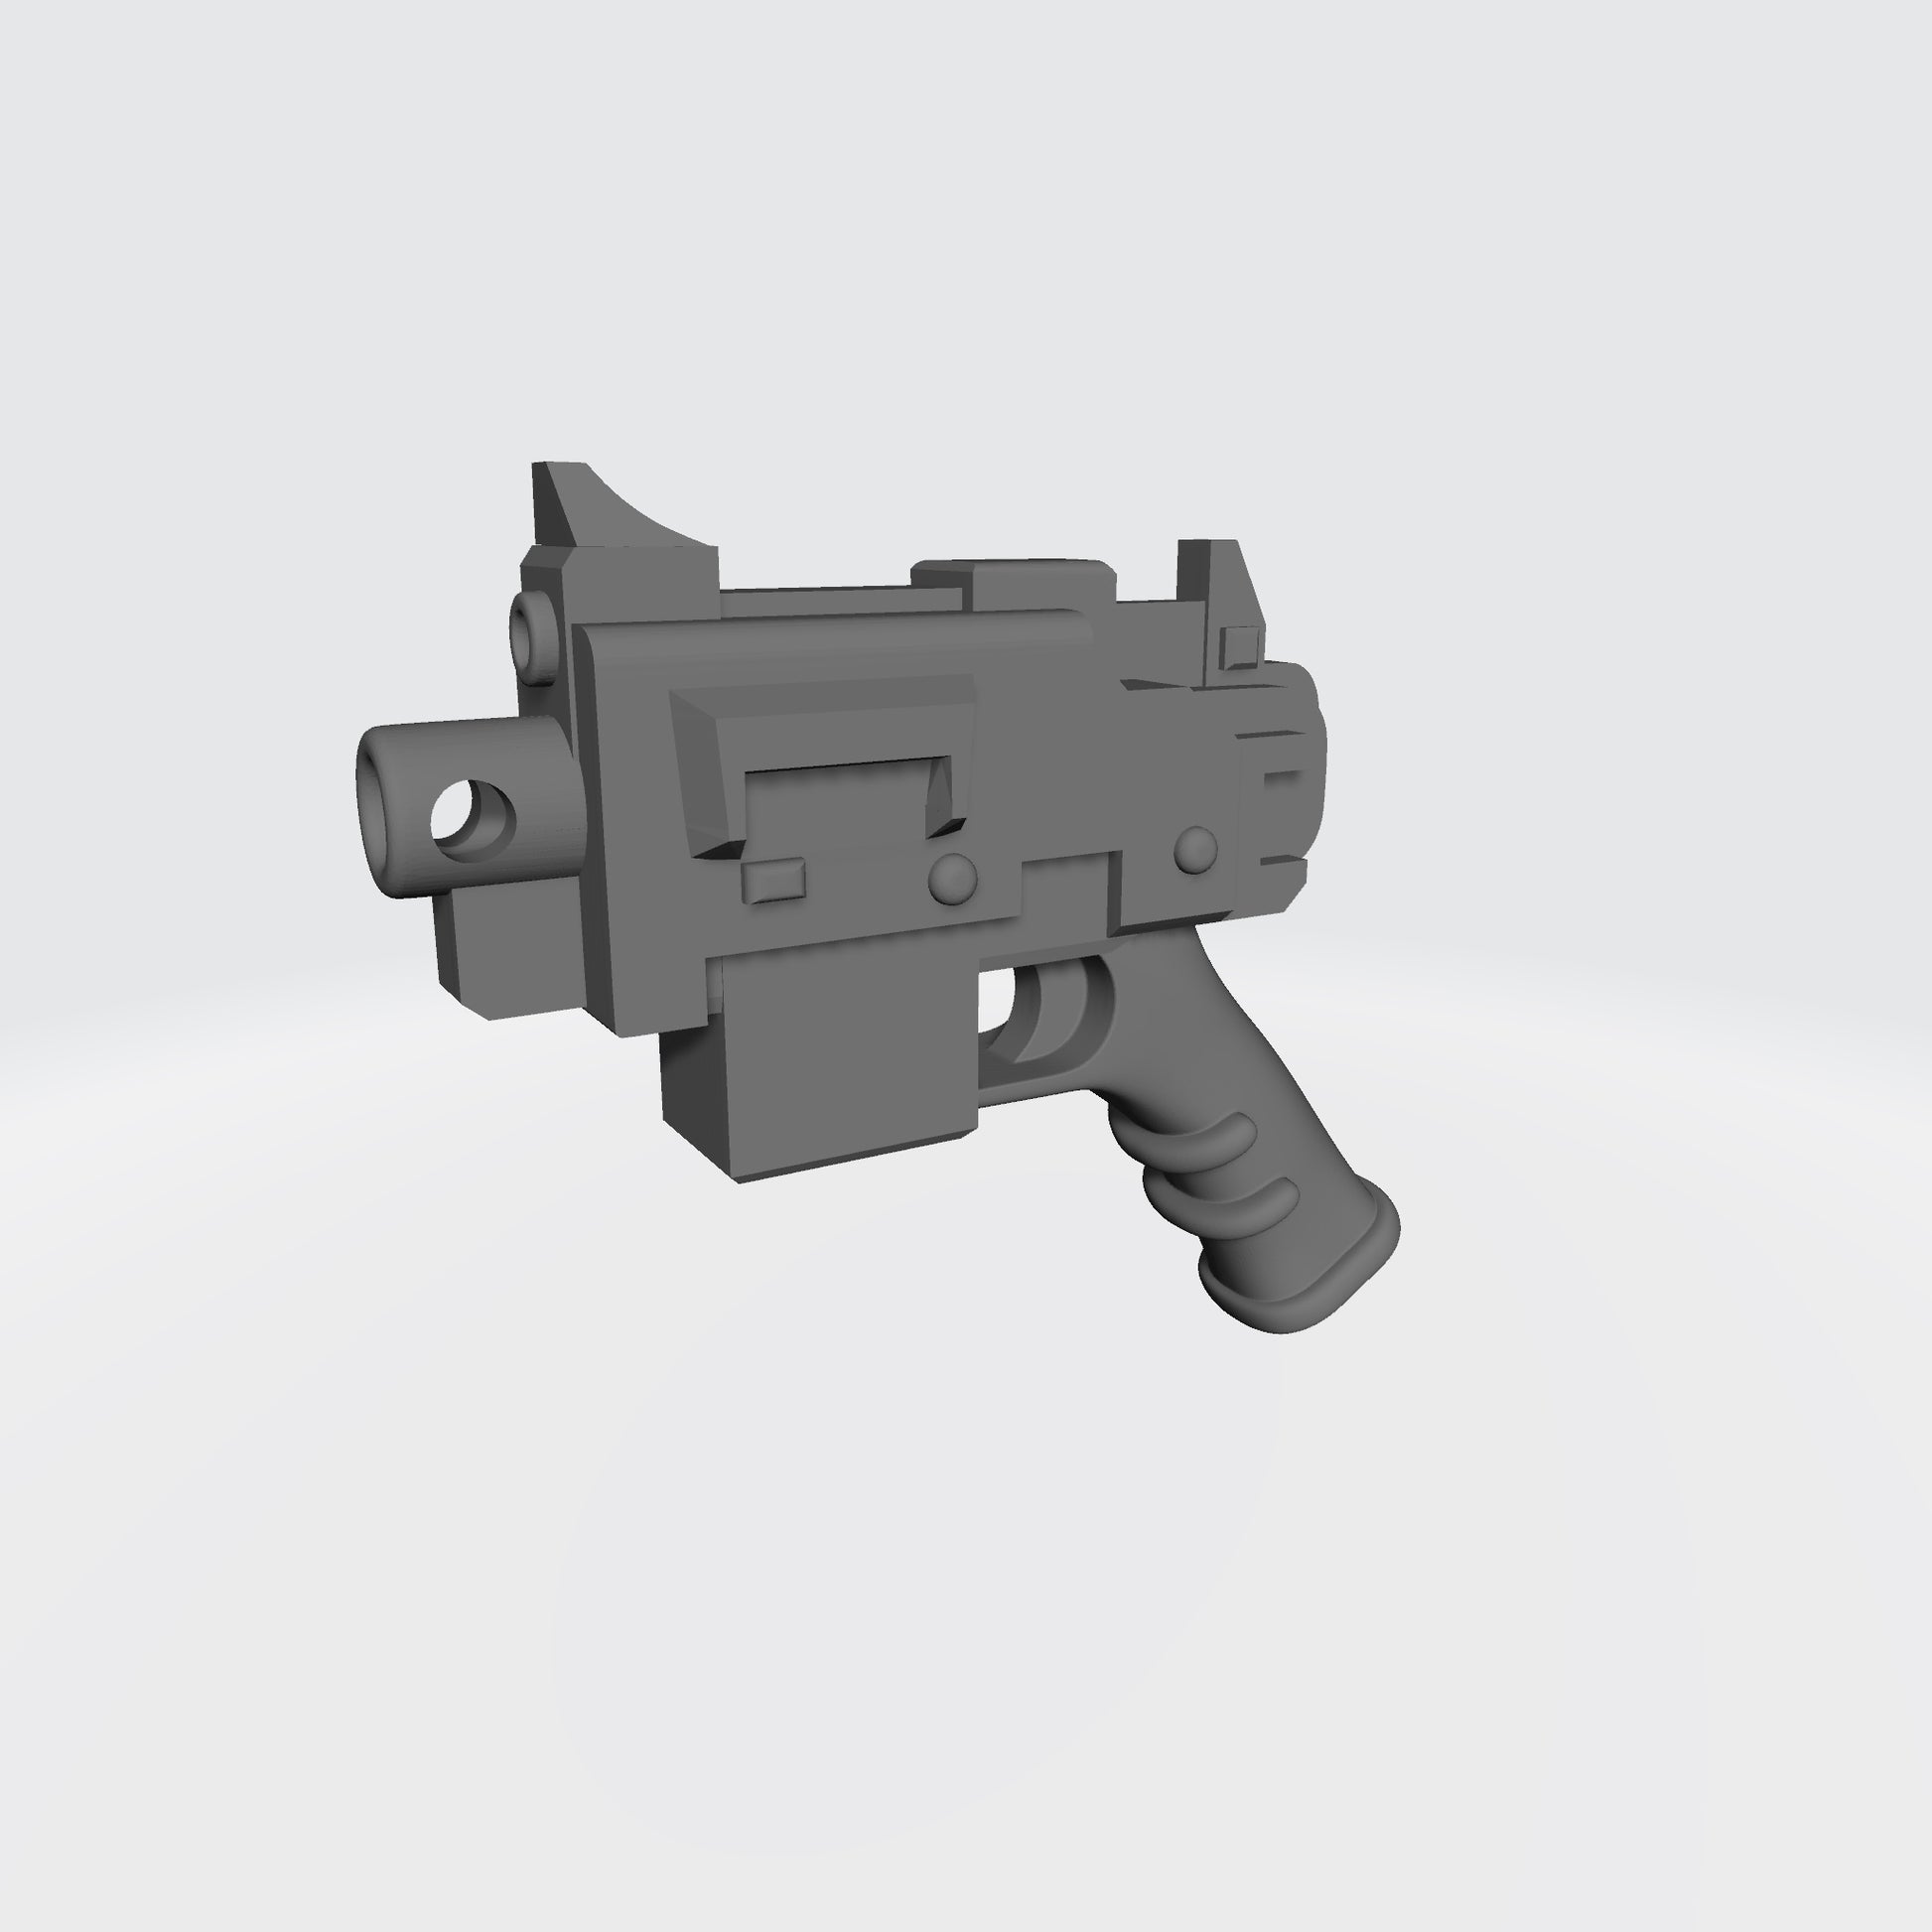 Bolt Pistol with Removable Magazine compatible with JoyToy Space Marine Action Figures by 18th Scale Armory